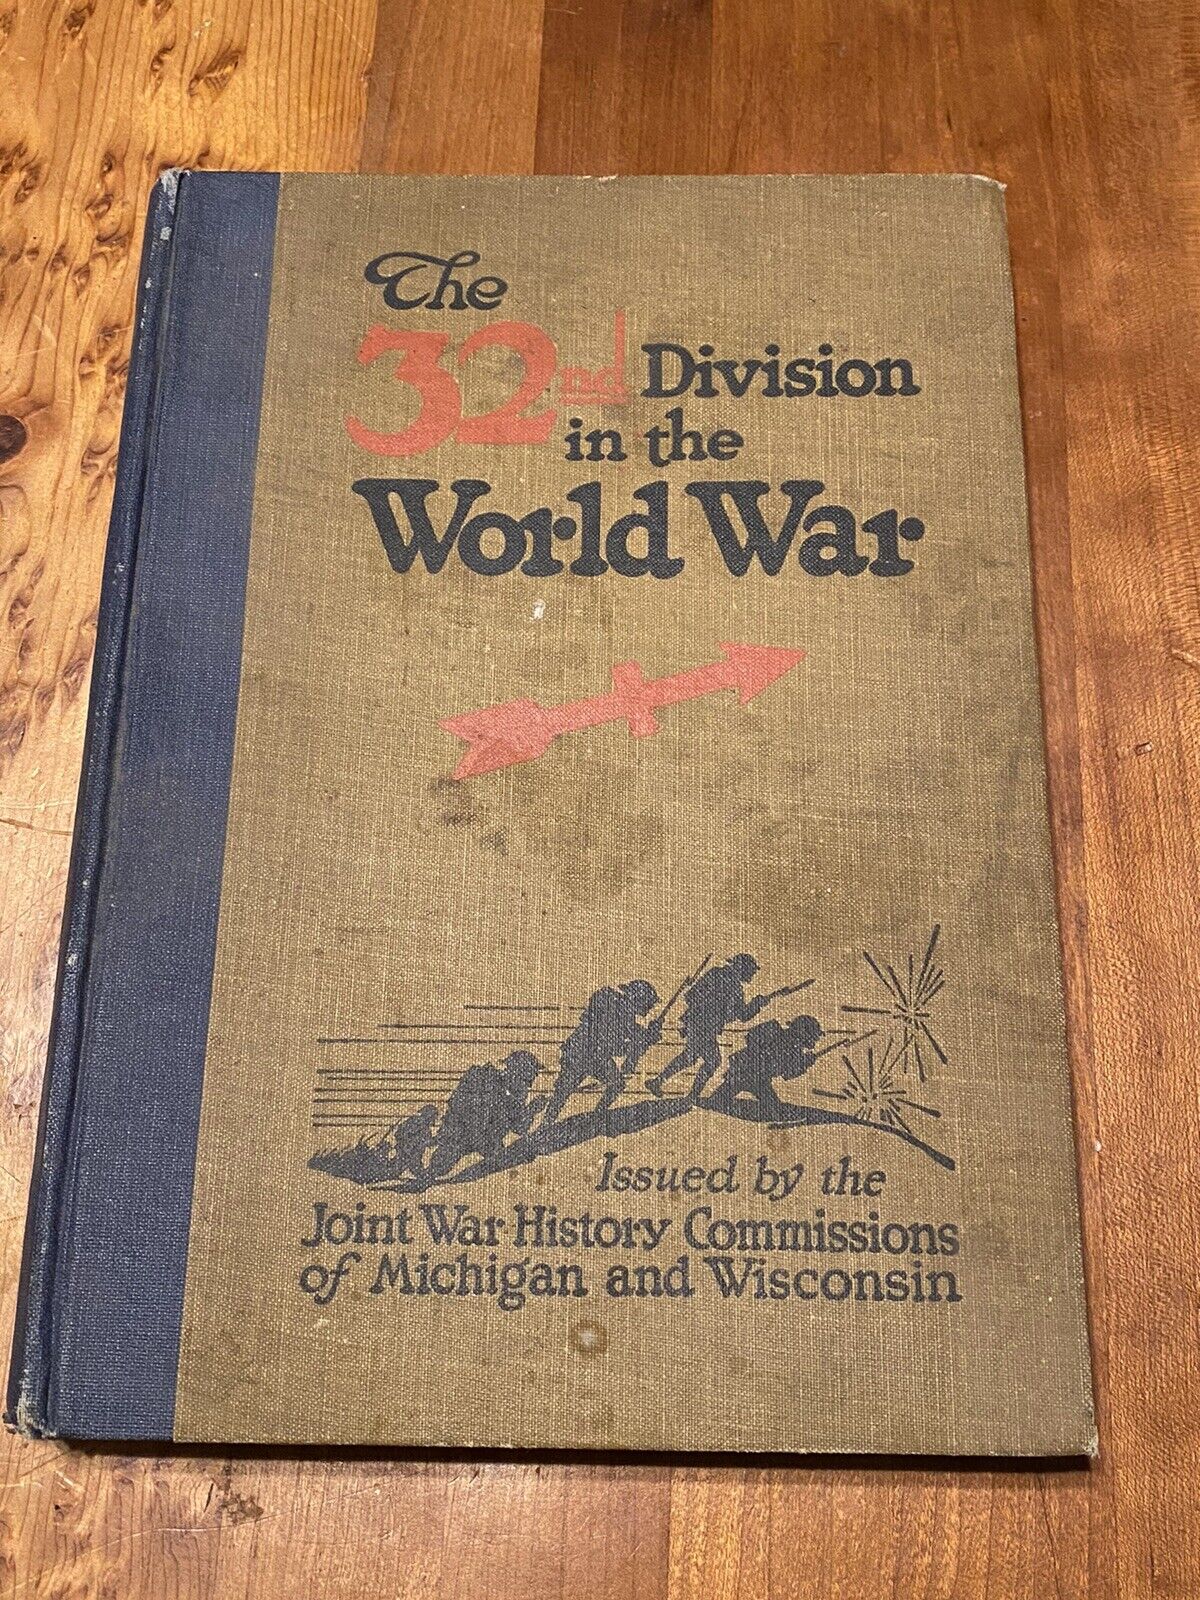 WW1 32nd Division in the World War Book 1920